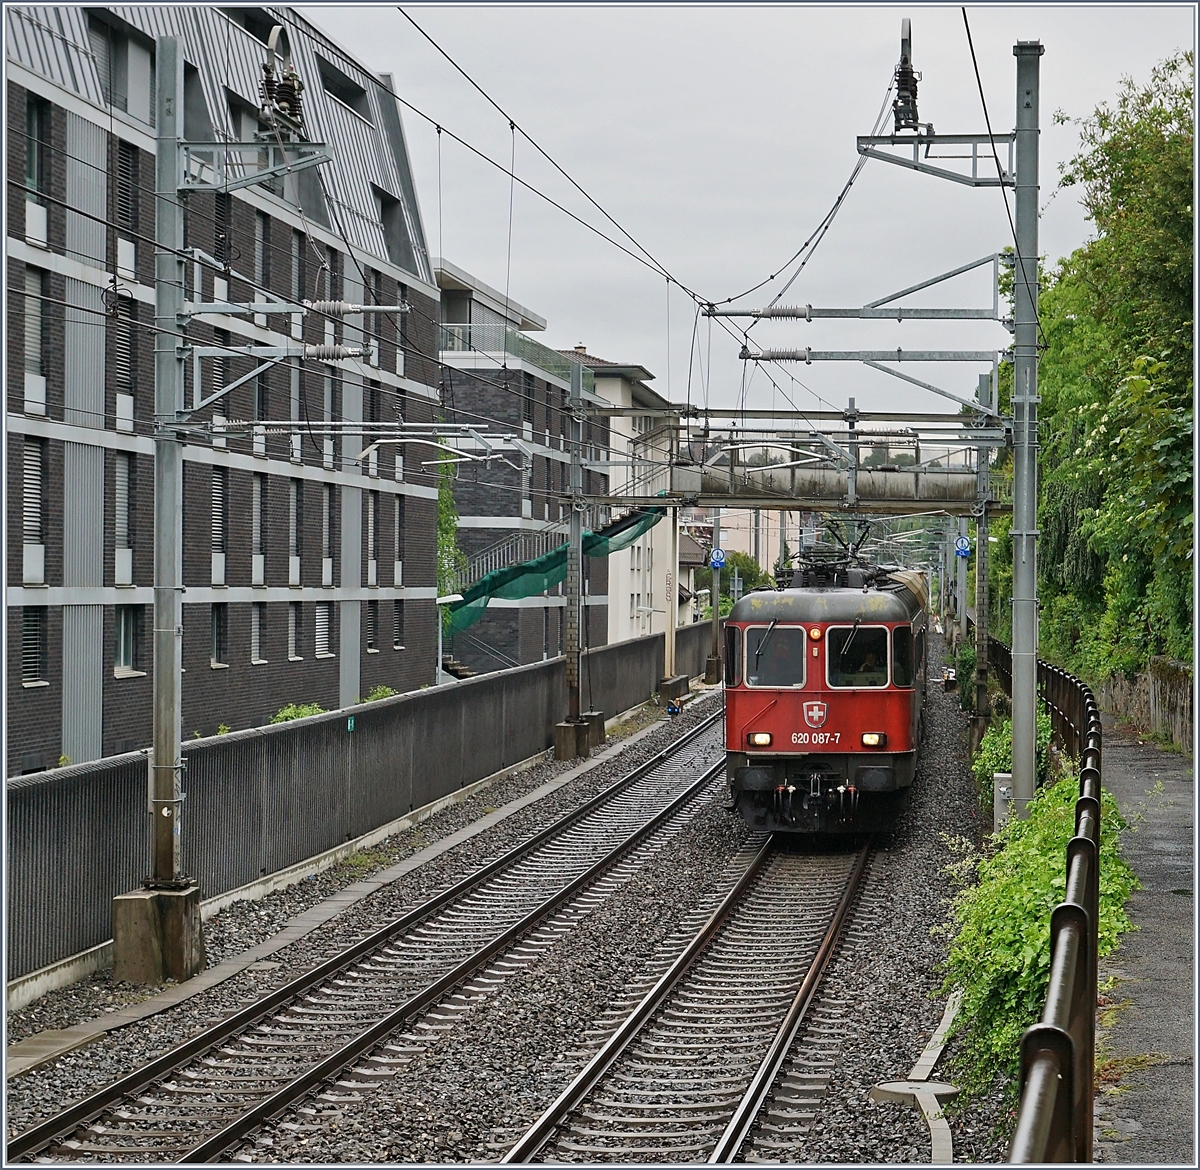 The SBB Re 620 087-7 wiht a Cargo train by Montreux.

05.05.2020